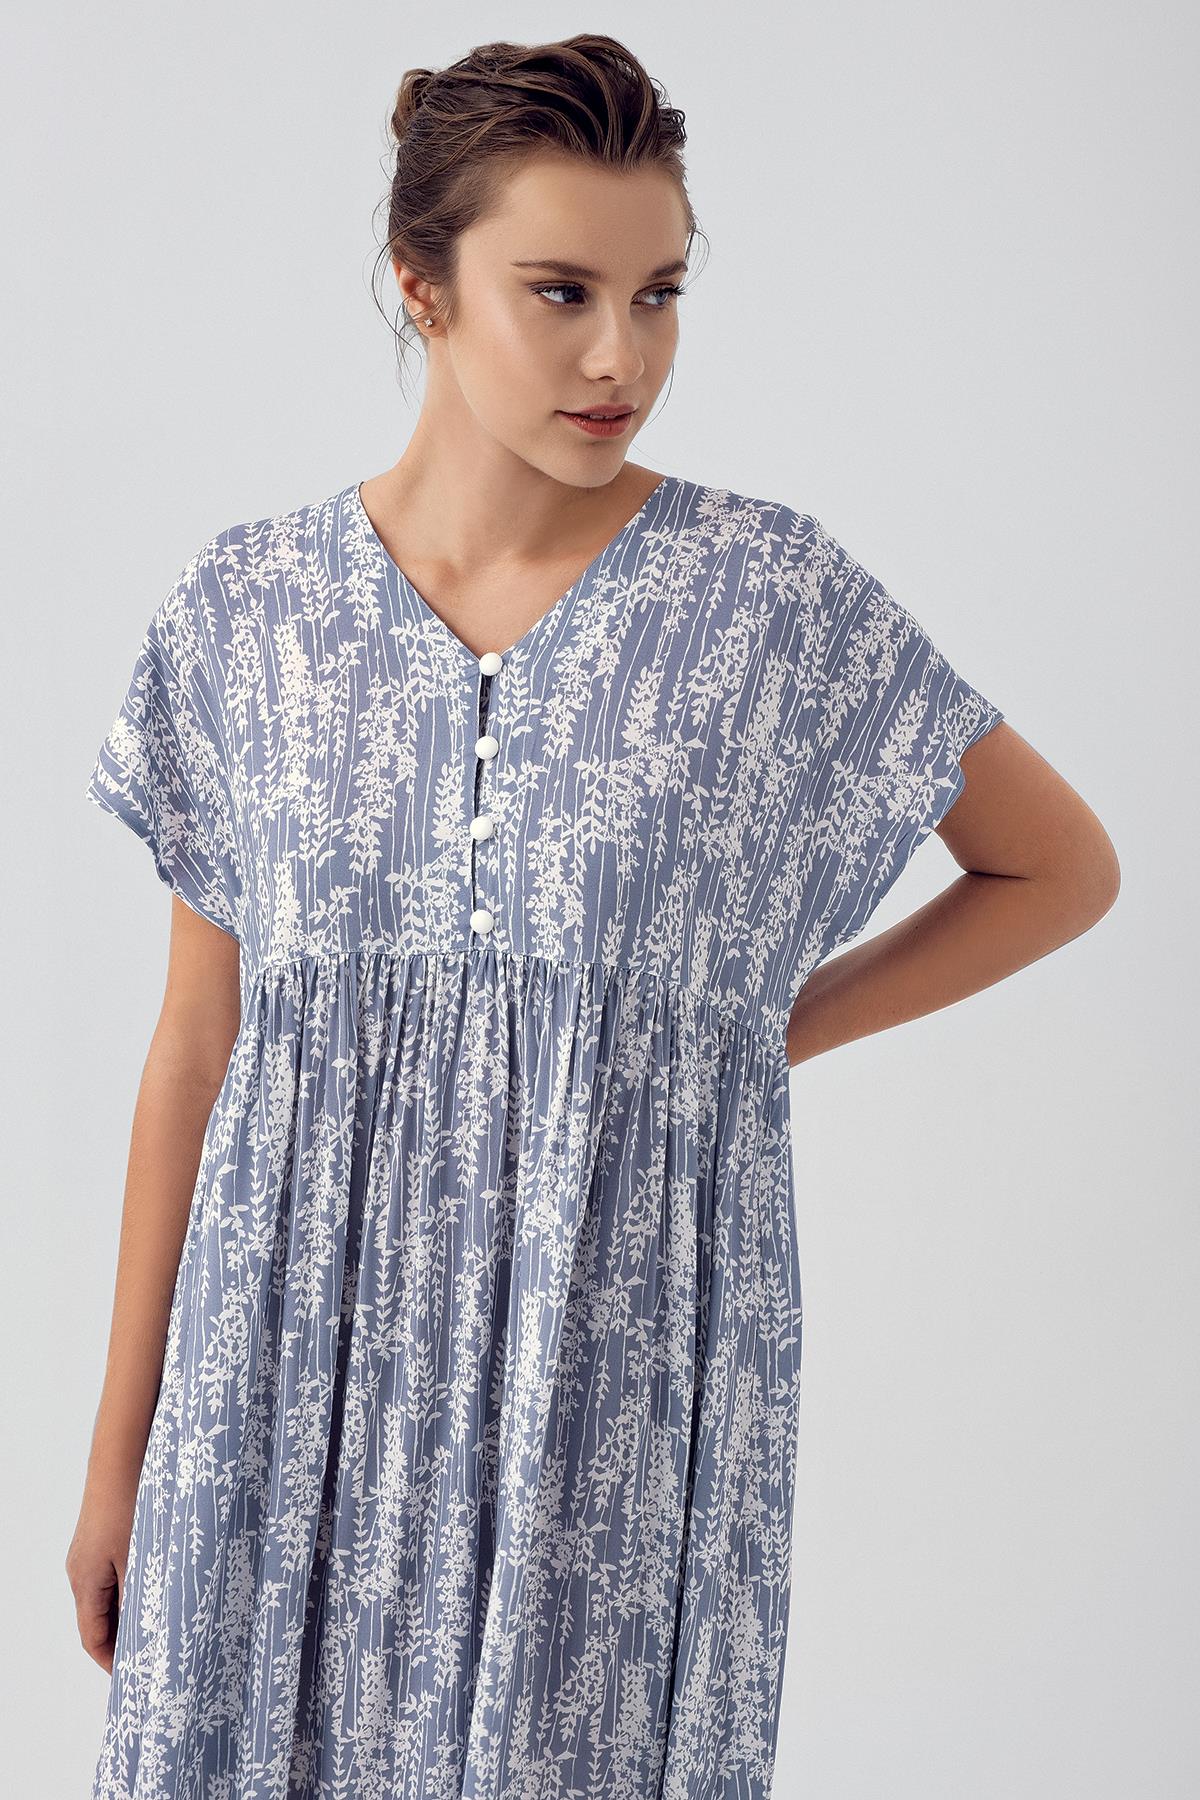 Patterned Buttoned Short Sleeved Flexible Viscose Maternity Nightgown 16105